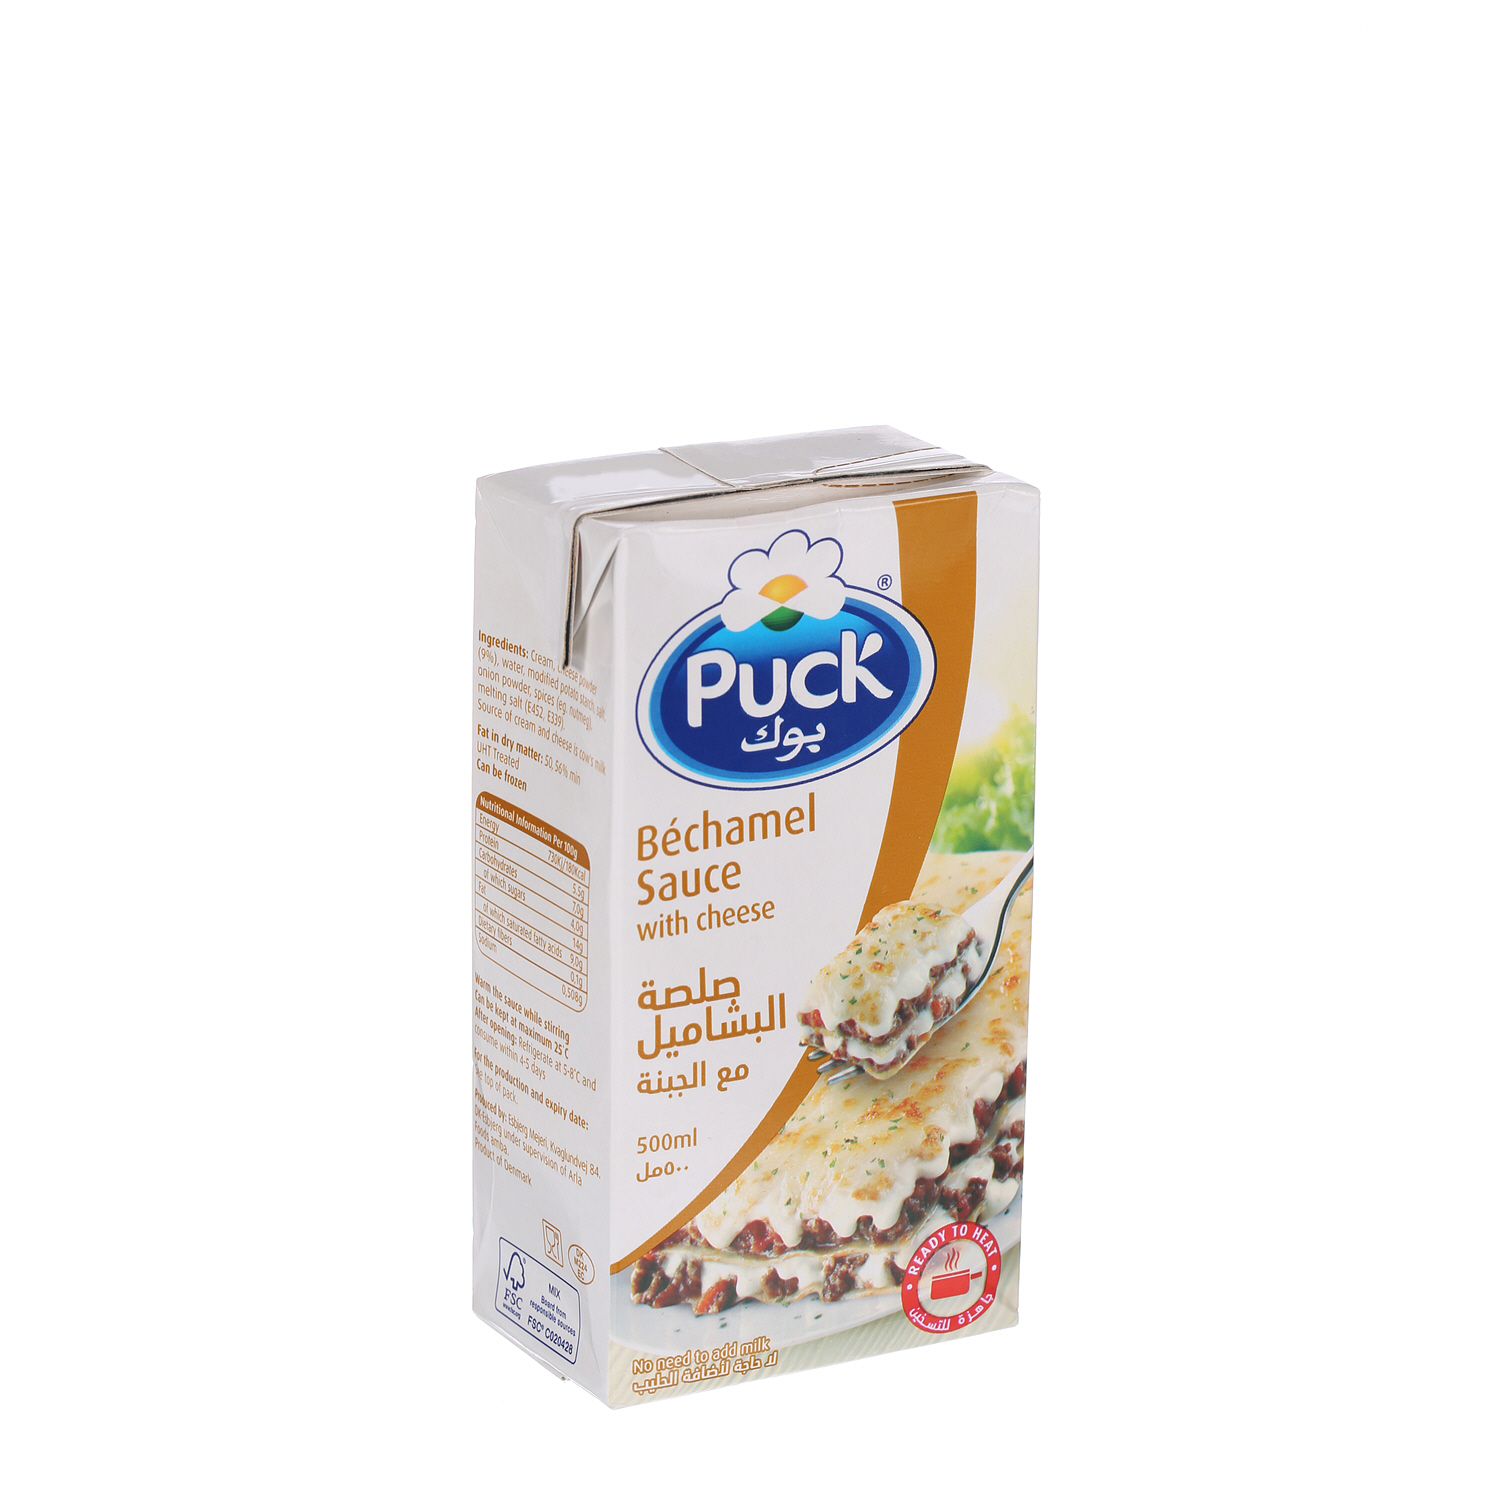 Puck Bechamel Sauce with Cheese 500ml